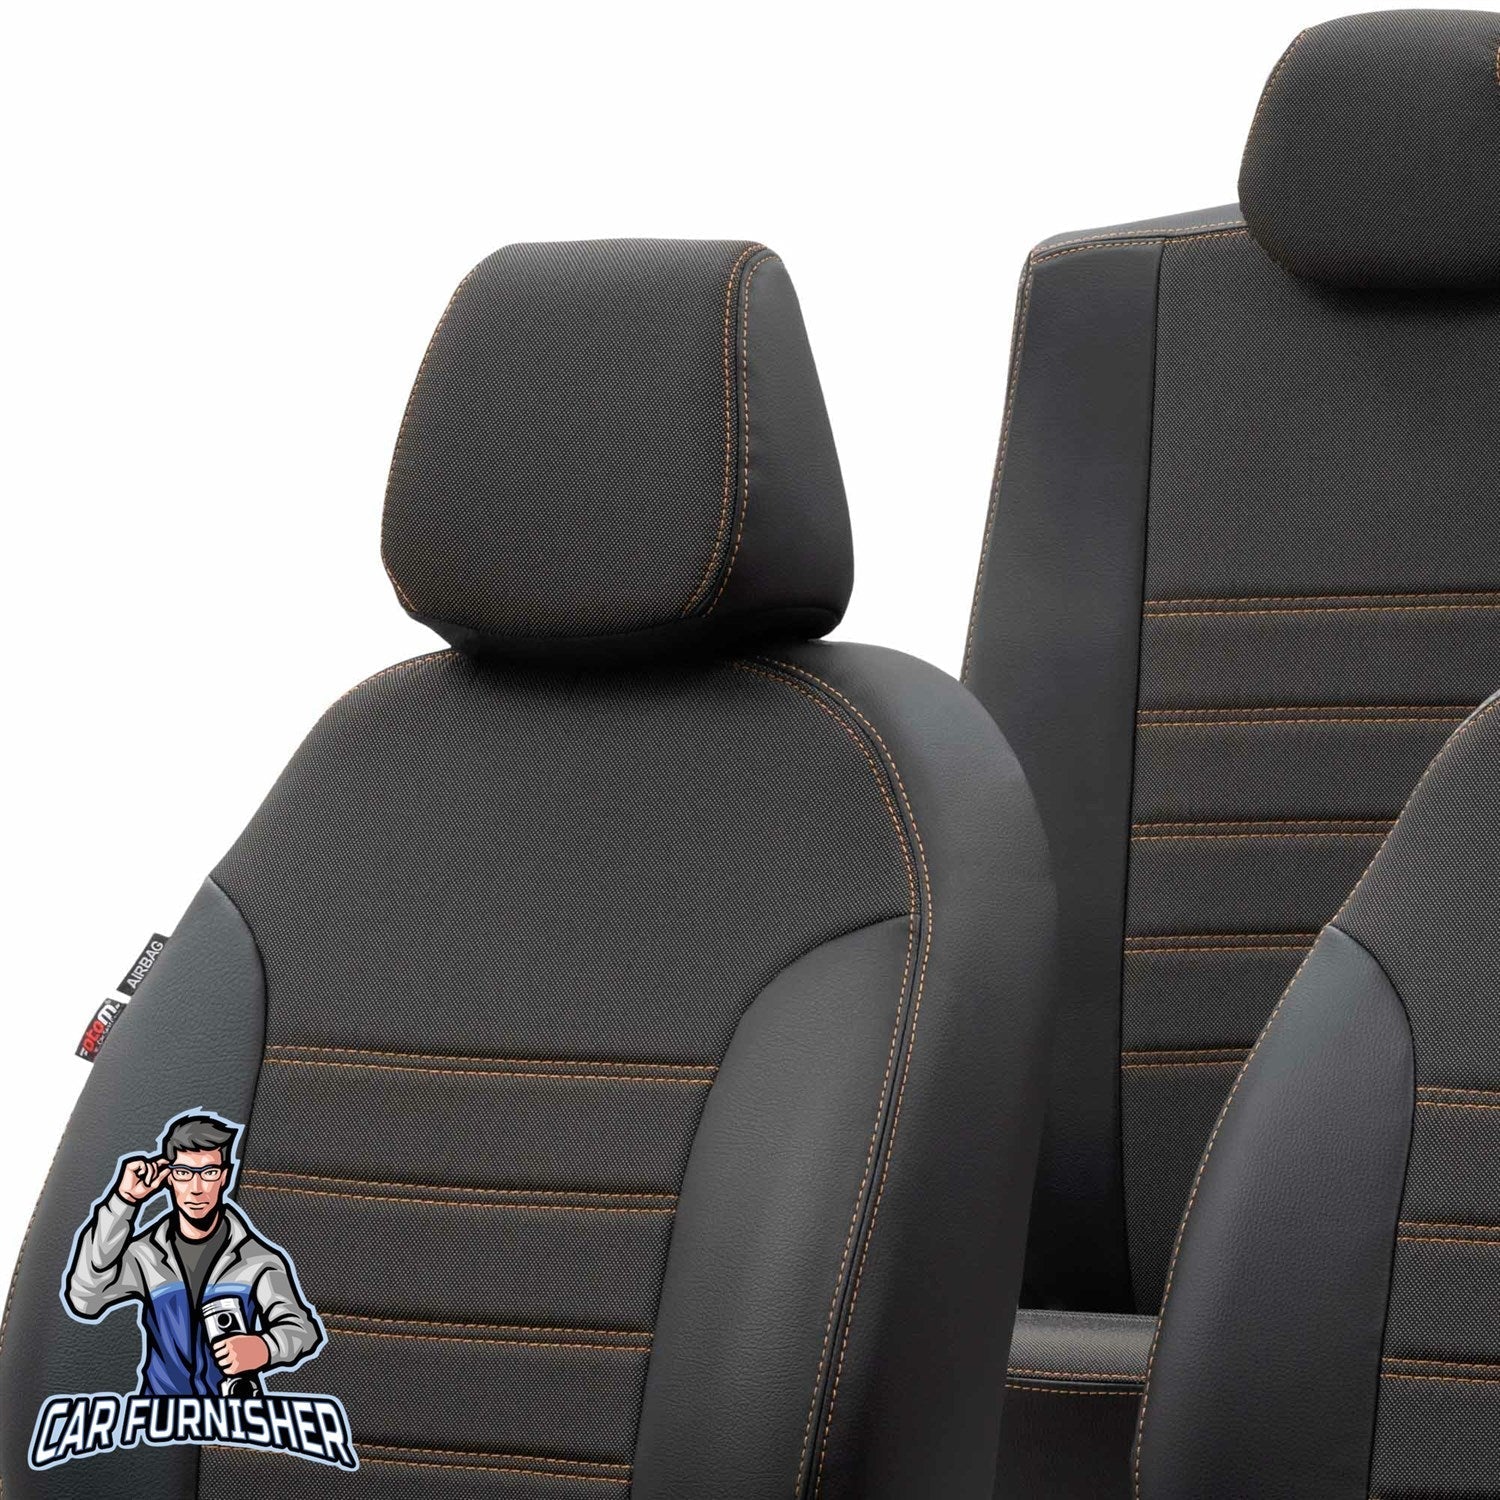 Ssangyong Actyon Seat Covers Paris Leather & Jacquard Design Dark Beige Leather & Jacquard Fabric